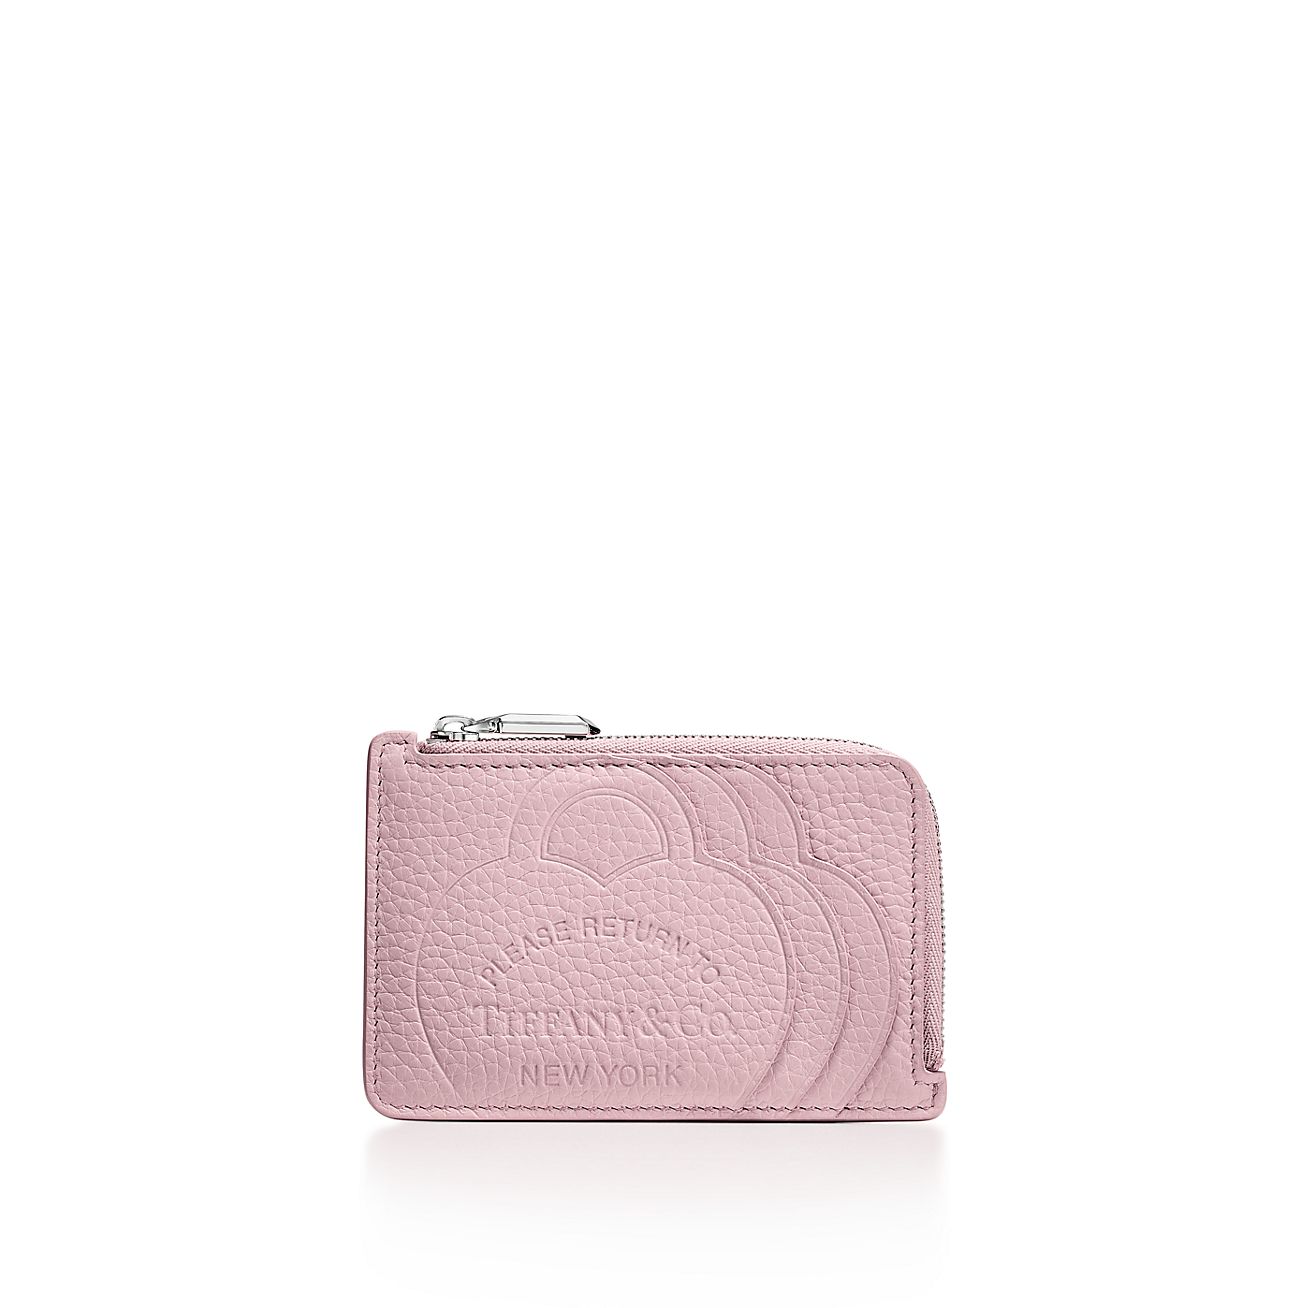 Return to Tiffany™ Zip Card Case in Crystal Pink Leather | Tiffany 